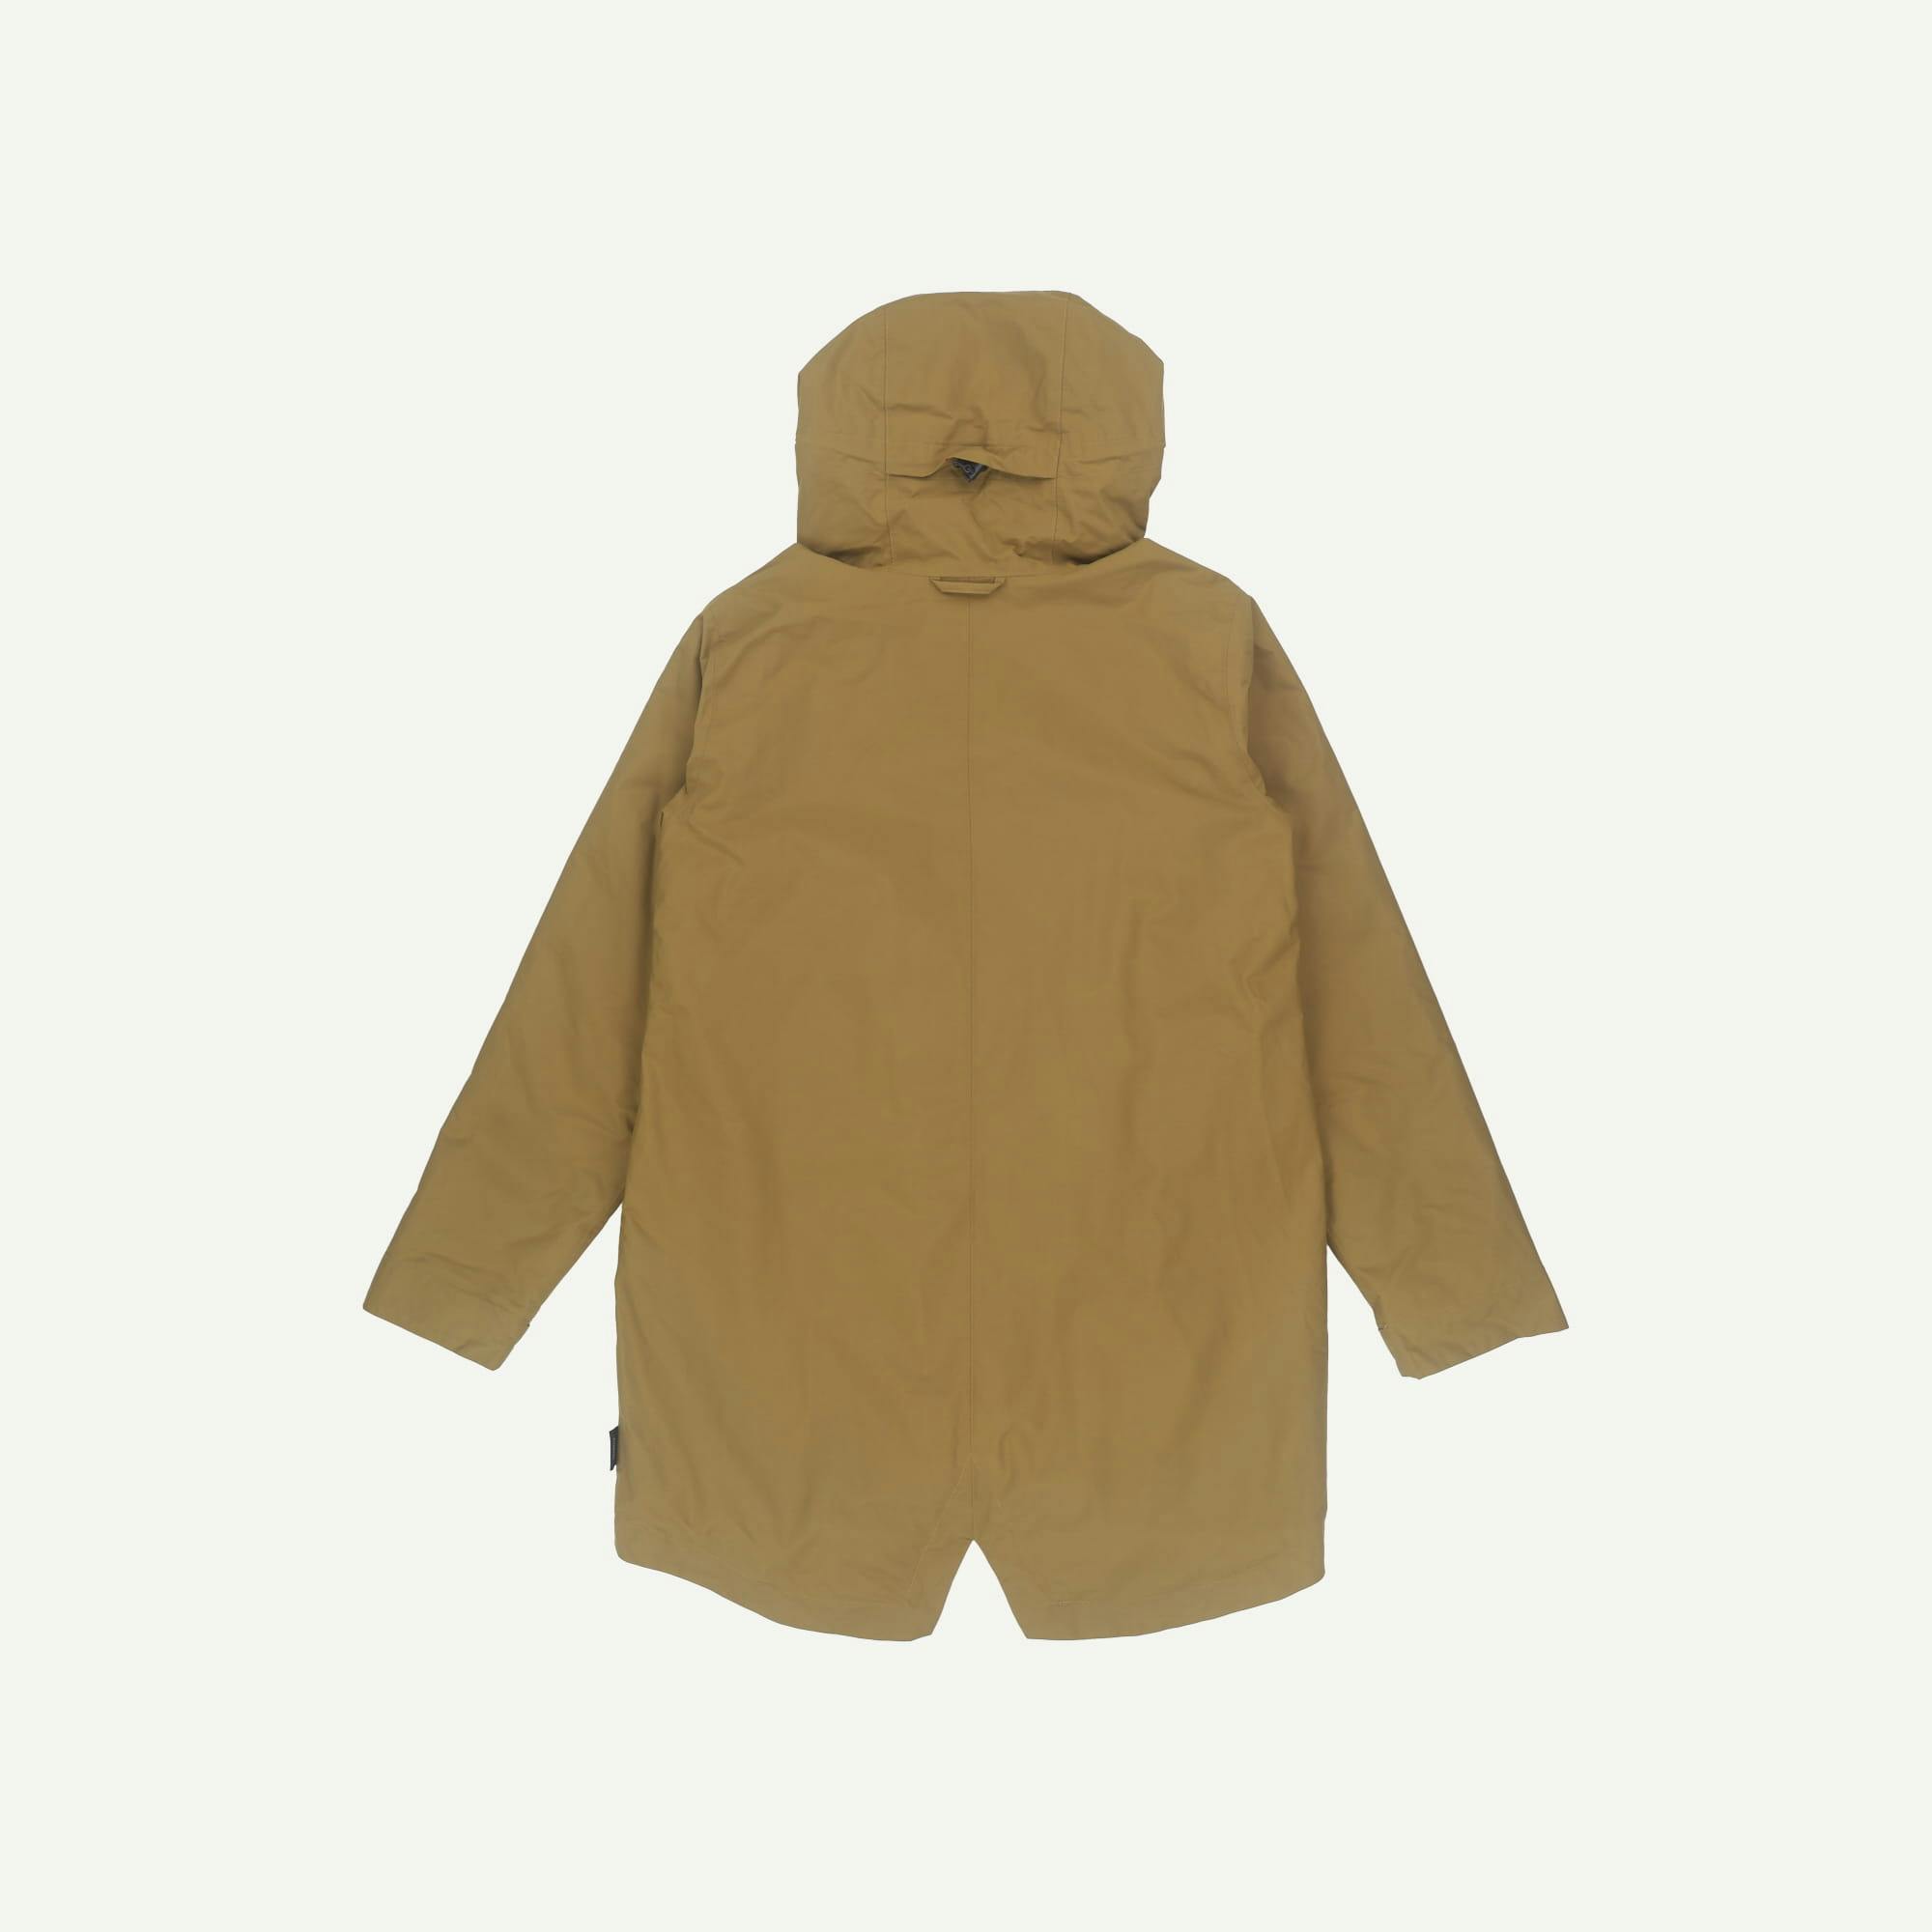 Finisterre As new Olive Jacket